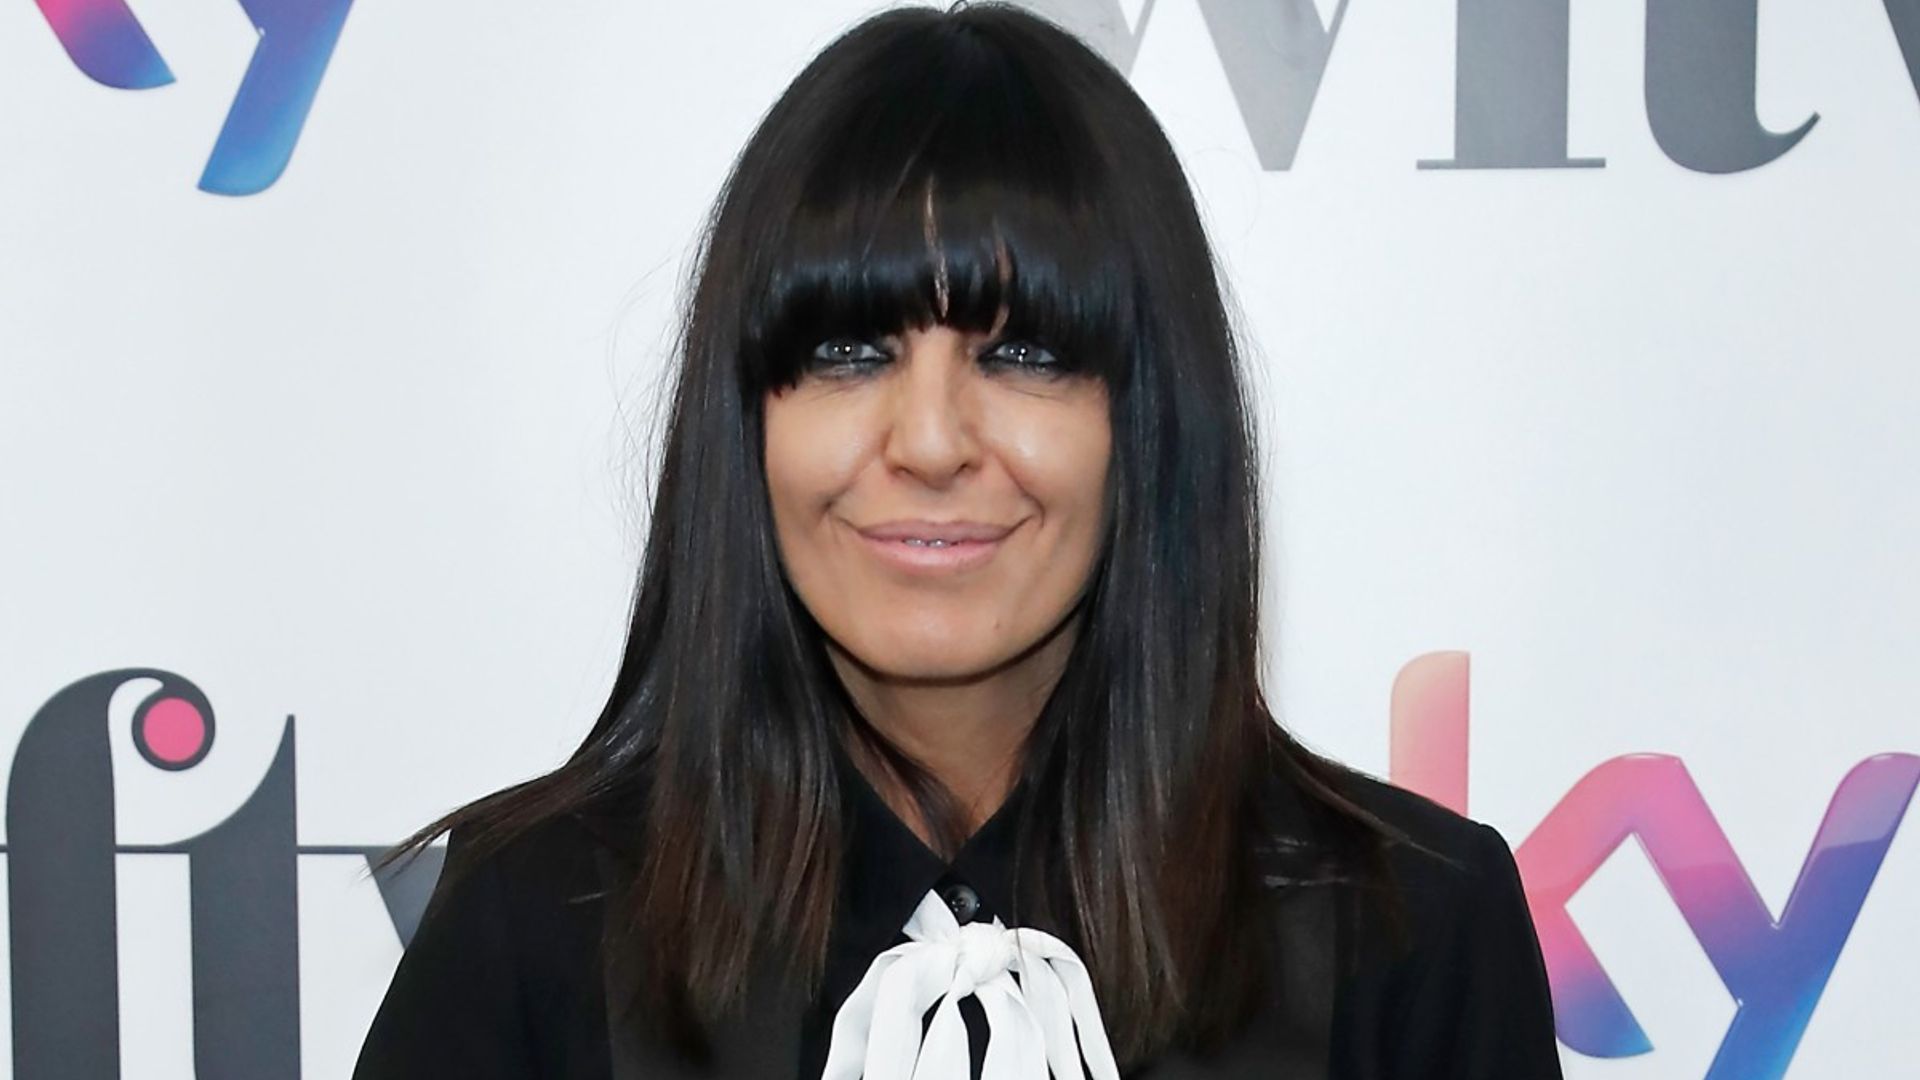 Claudia Winkleman shares exciting update about Strictly